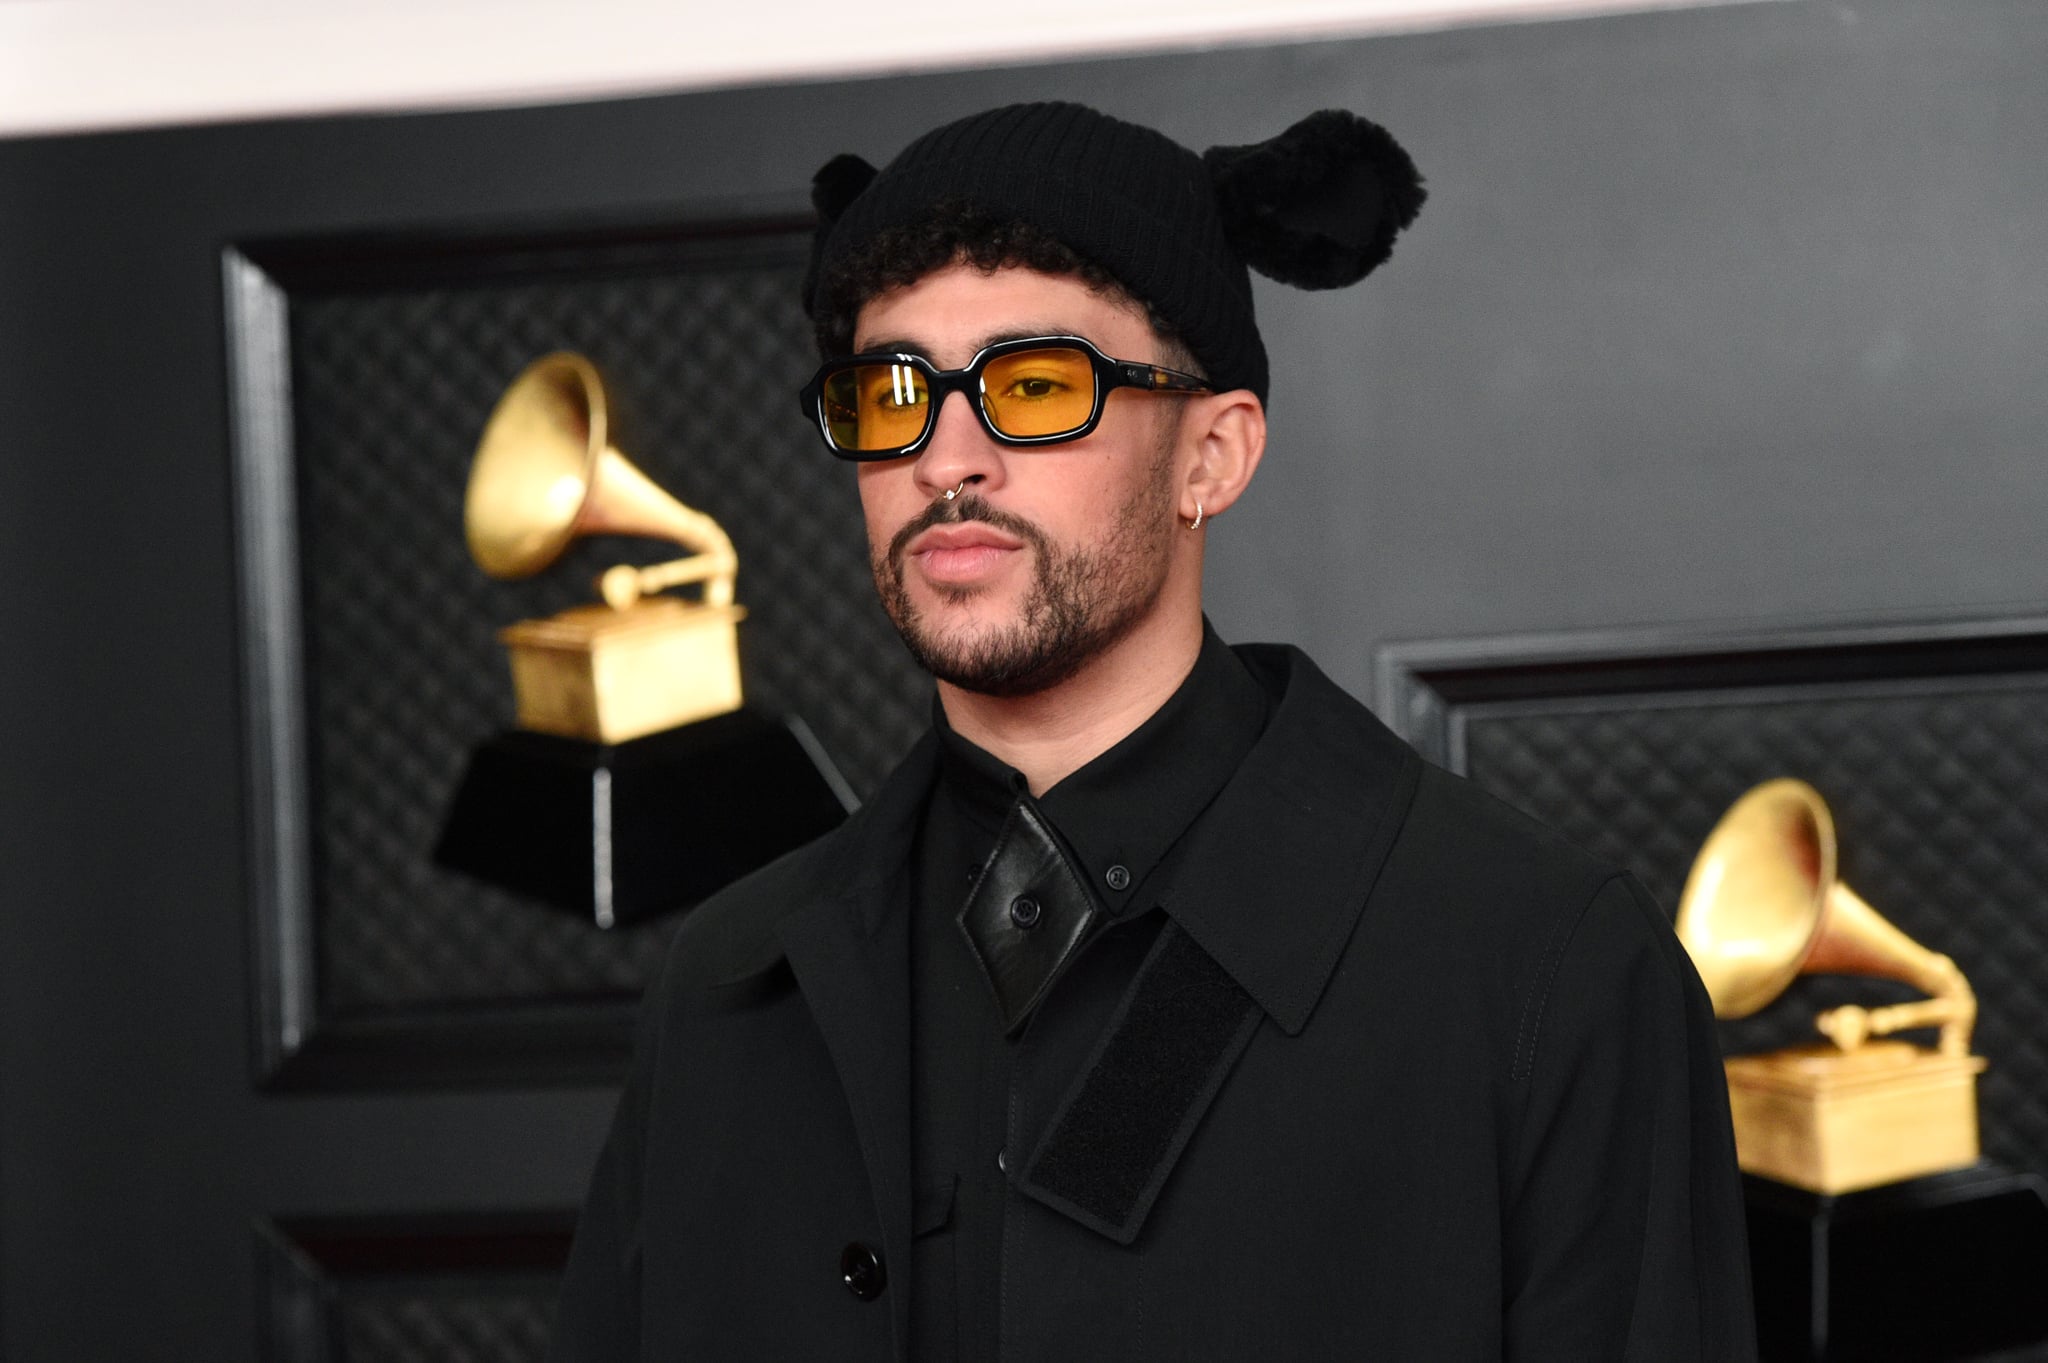 LOS ANGELES, CALIFORNIA - MARCH 14: Bad Bunny attends the 63rd Annual GRAMMY Awards at Los Angeles Convention Center on March 14, 2021 in Los Angeles, California. (Photo by Kevin Mazur/Getty Images for The Recording Academy )